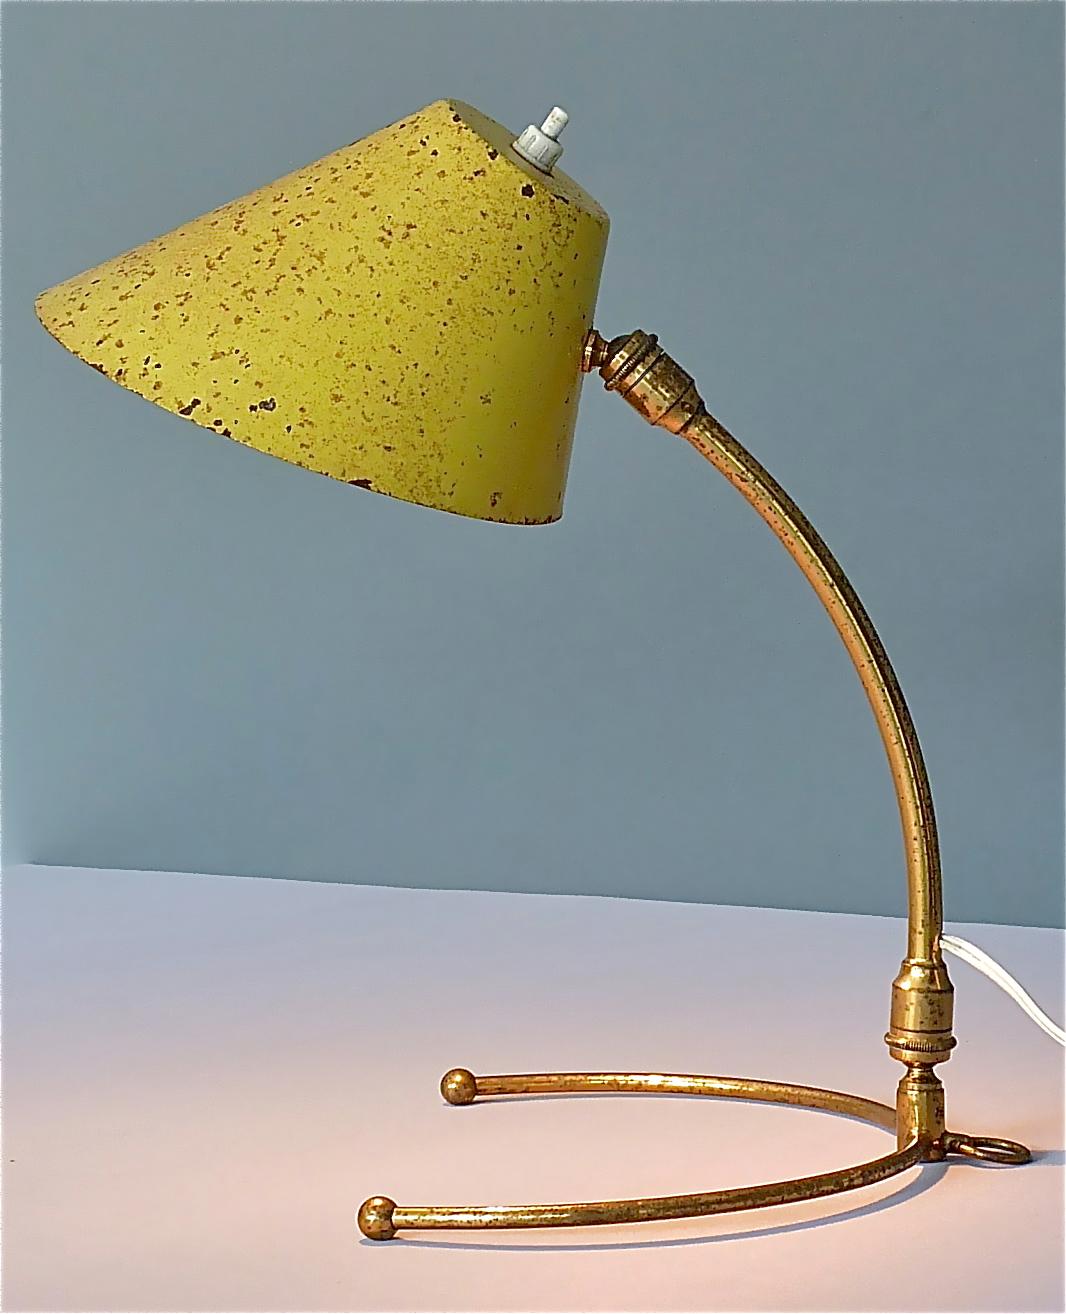 Super rare midcentury table / wall lamp by Robert Mathieu and most probably in cooperation with Pierre Guariche, designed and manufactured in France, circa 1950s. A yellow enameled aluminum metal shade with integrated switch and brass bajonet